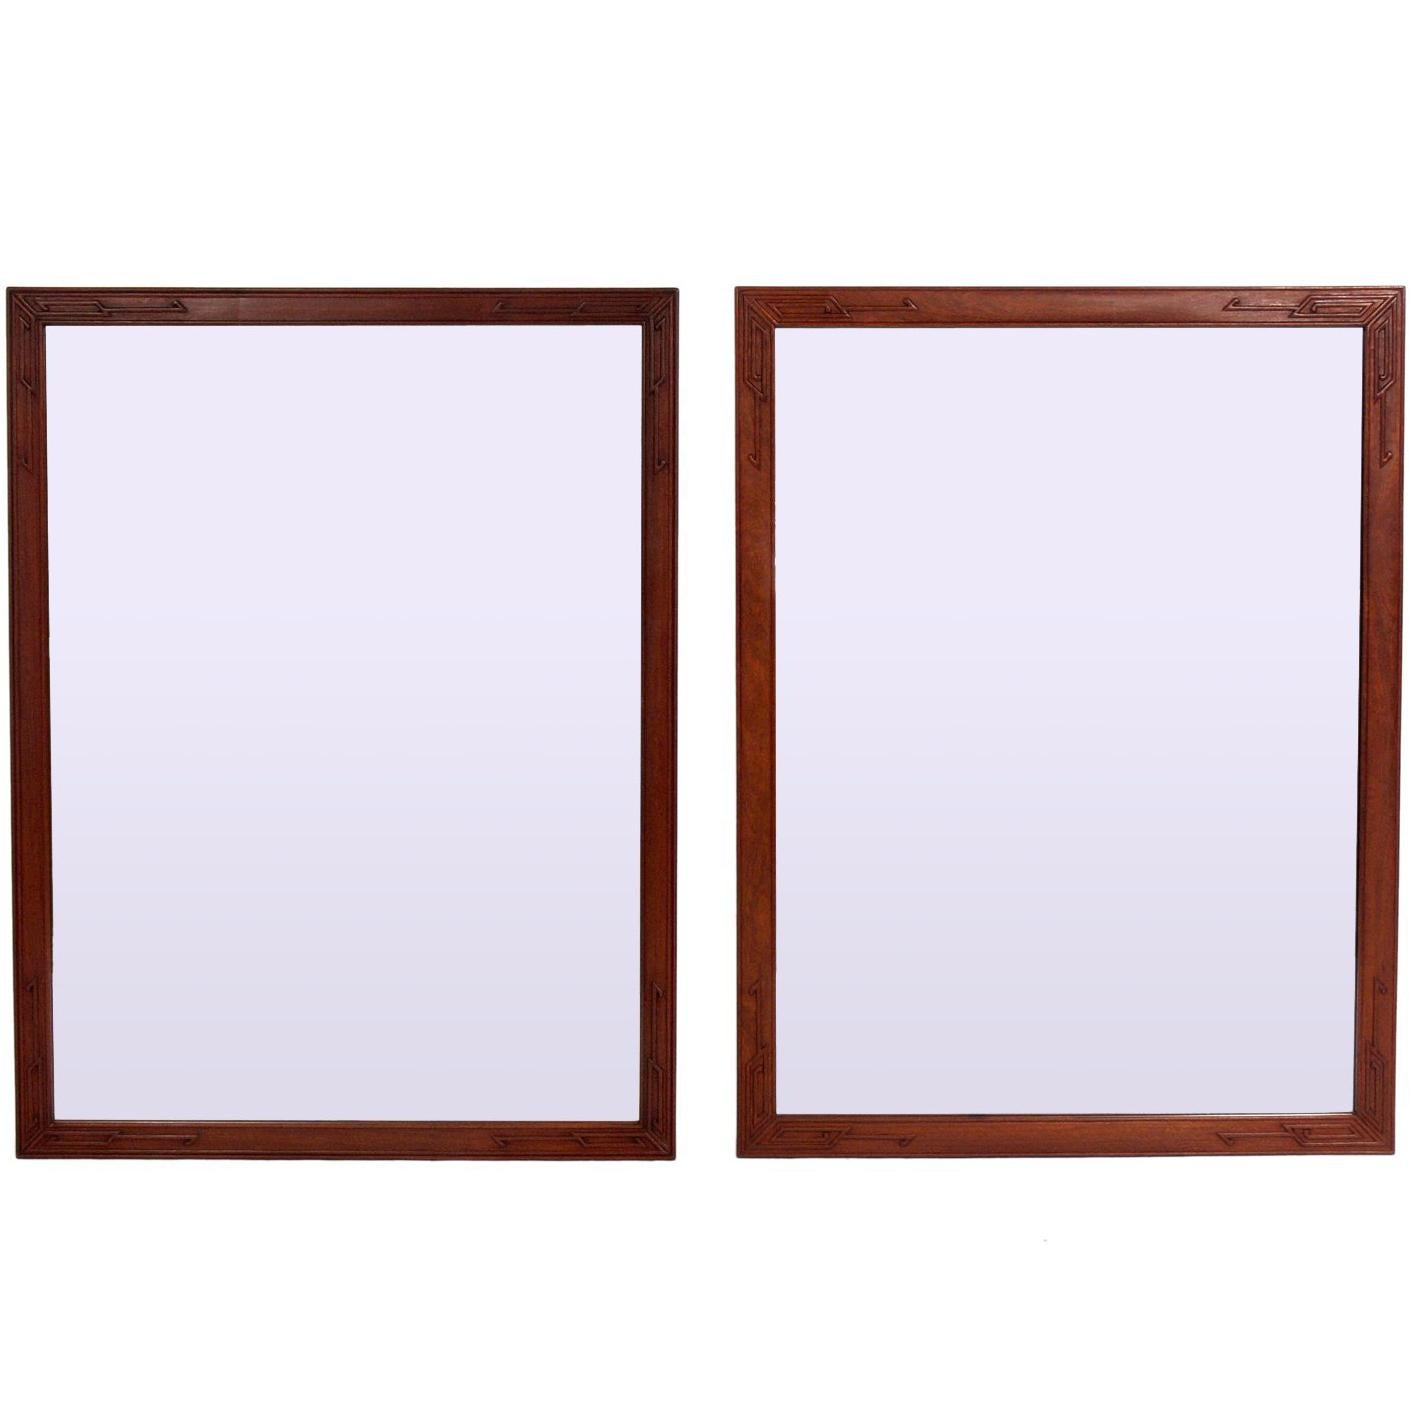 Pair of Clean Lined Mirrors with Subtle Asian Design